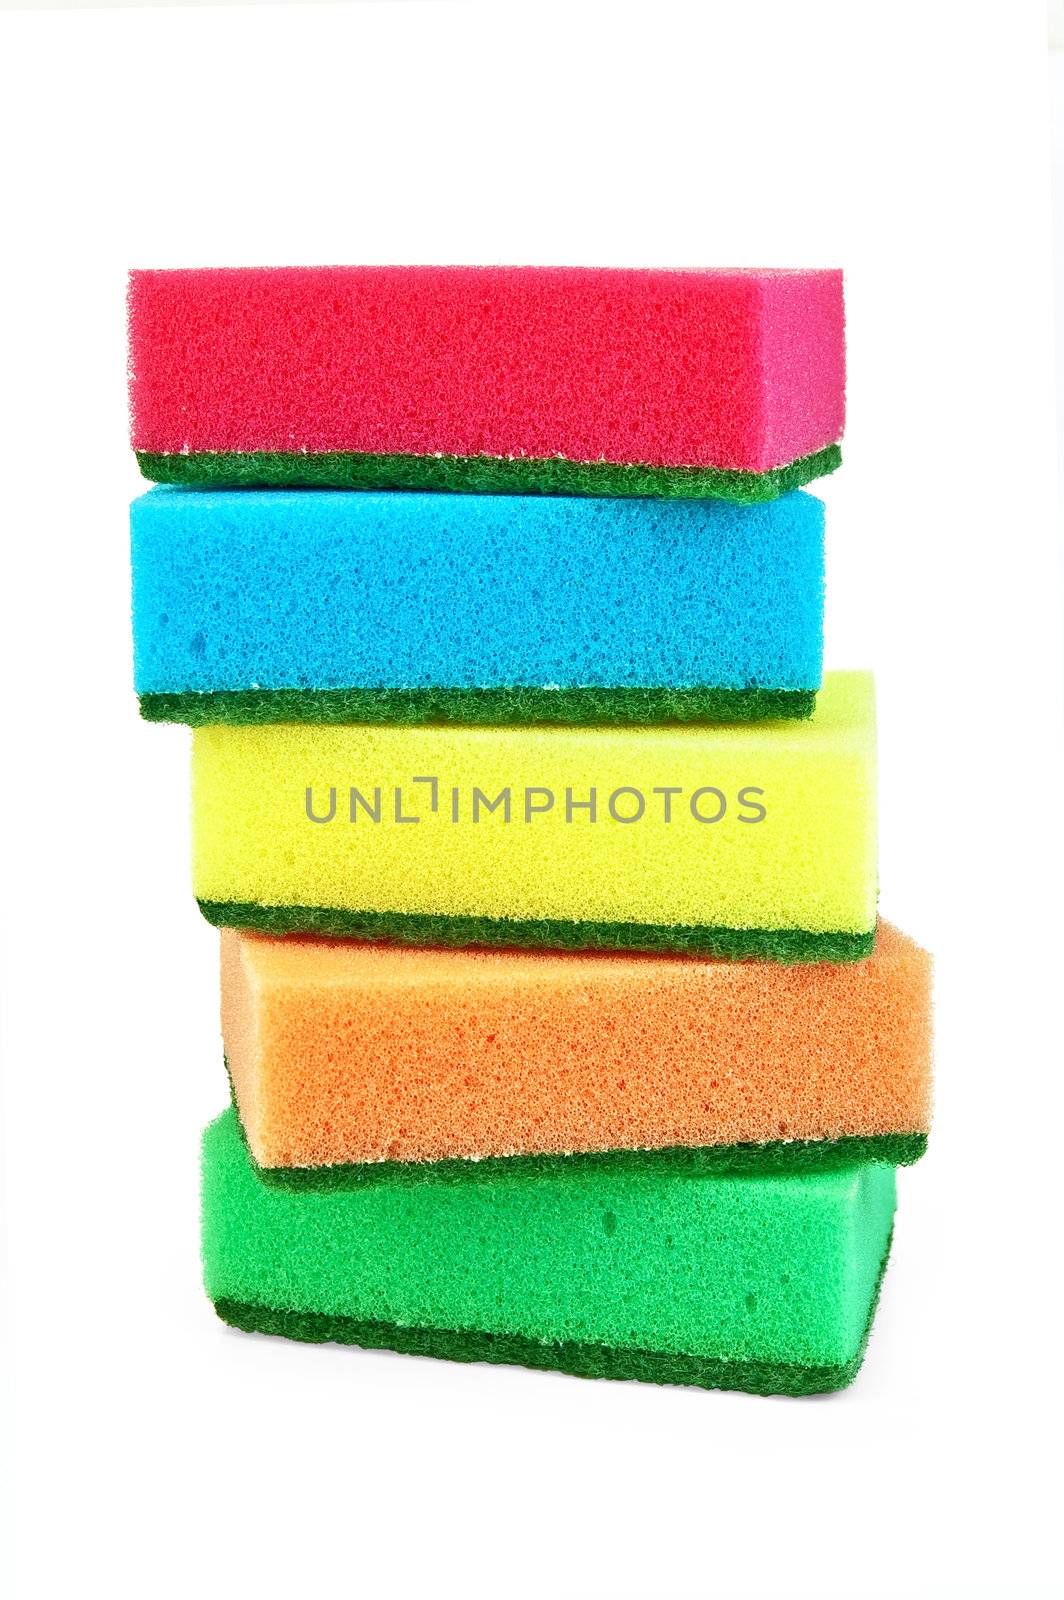 A stack of sponges by rezkrr